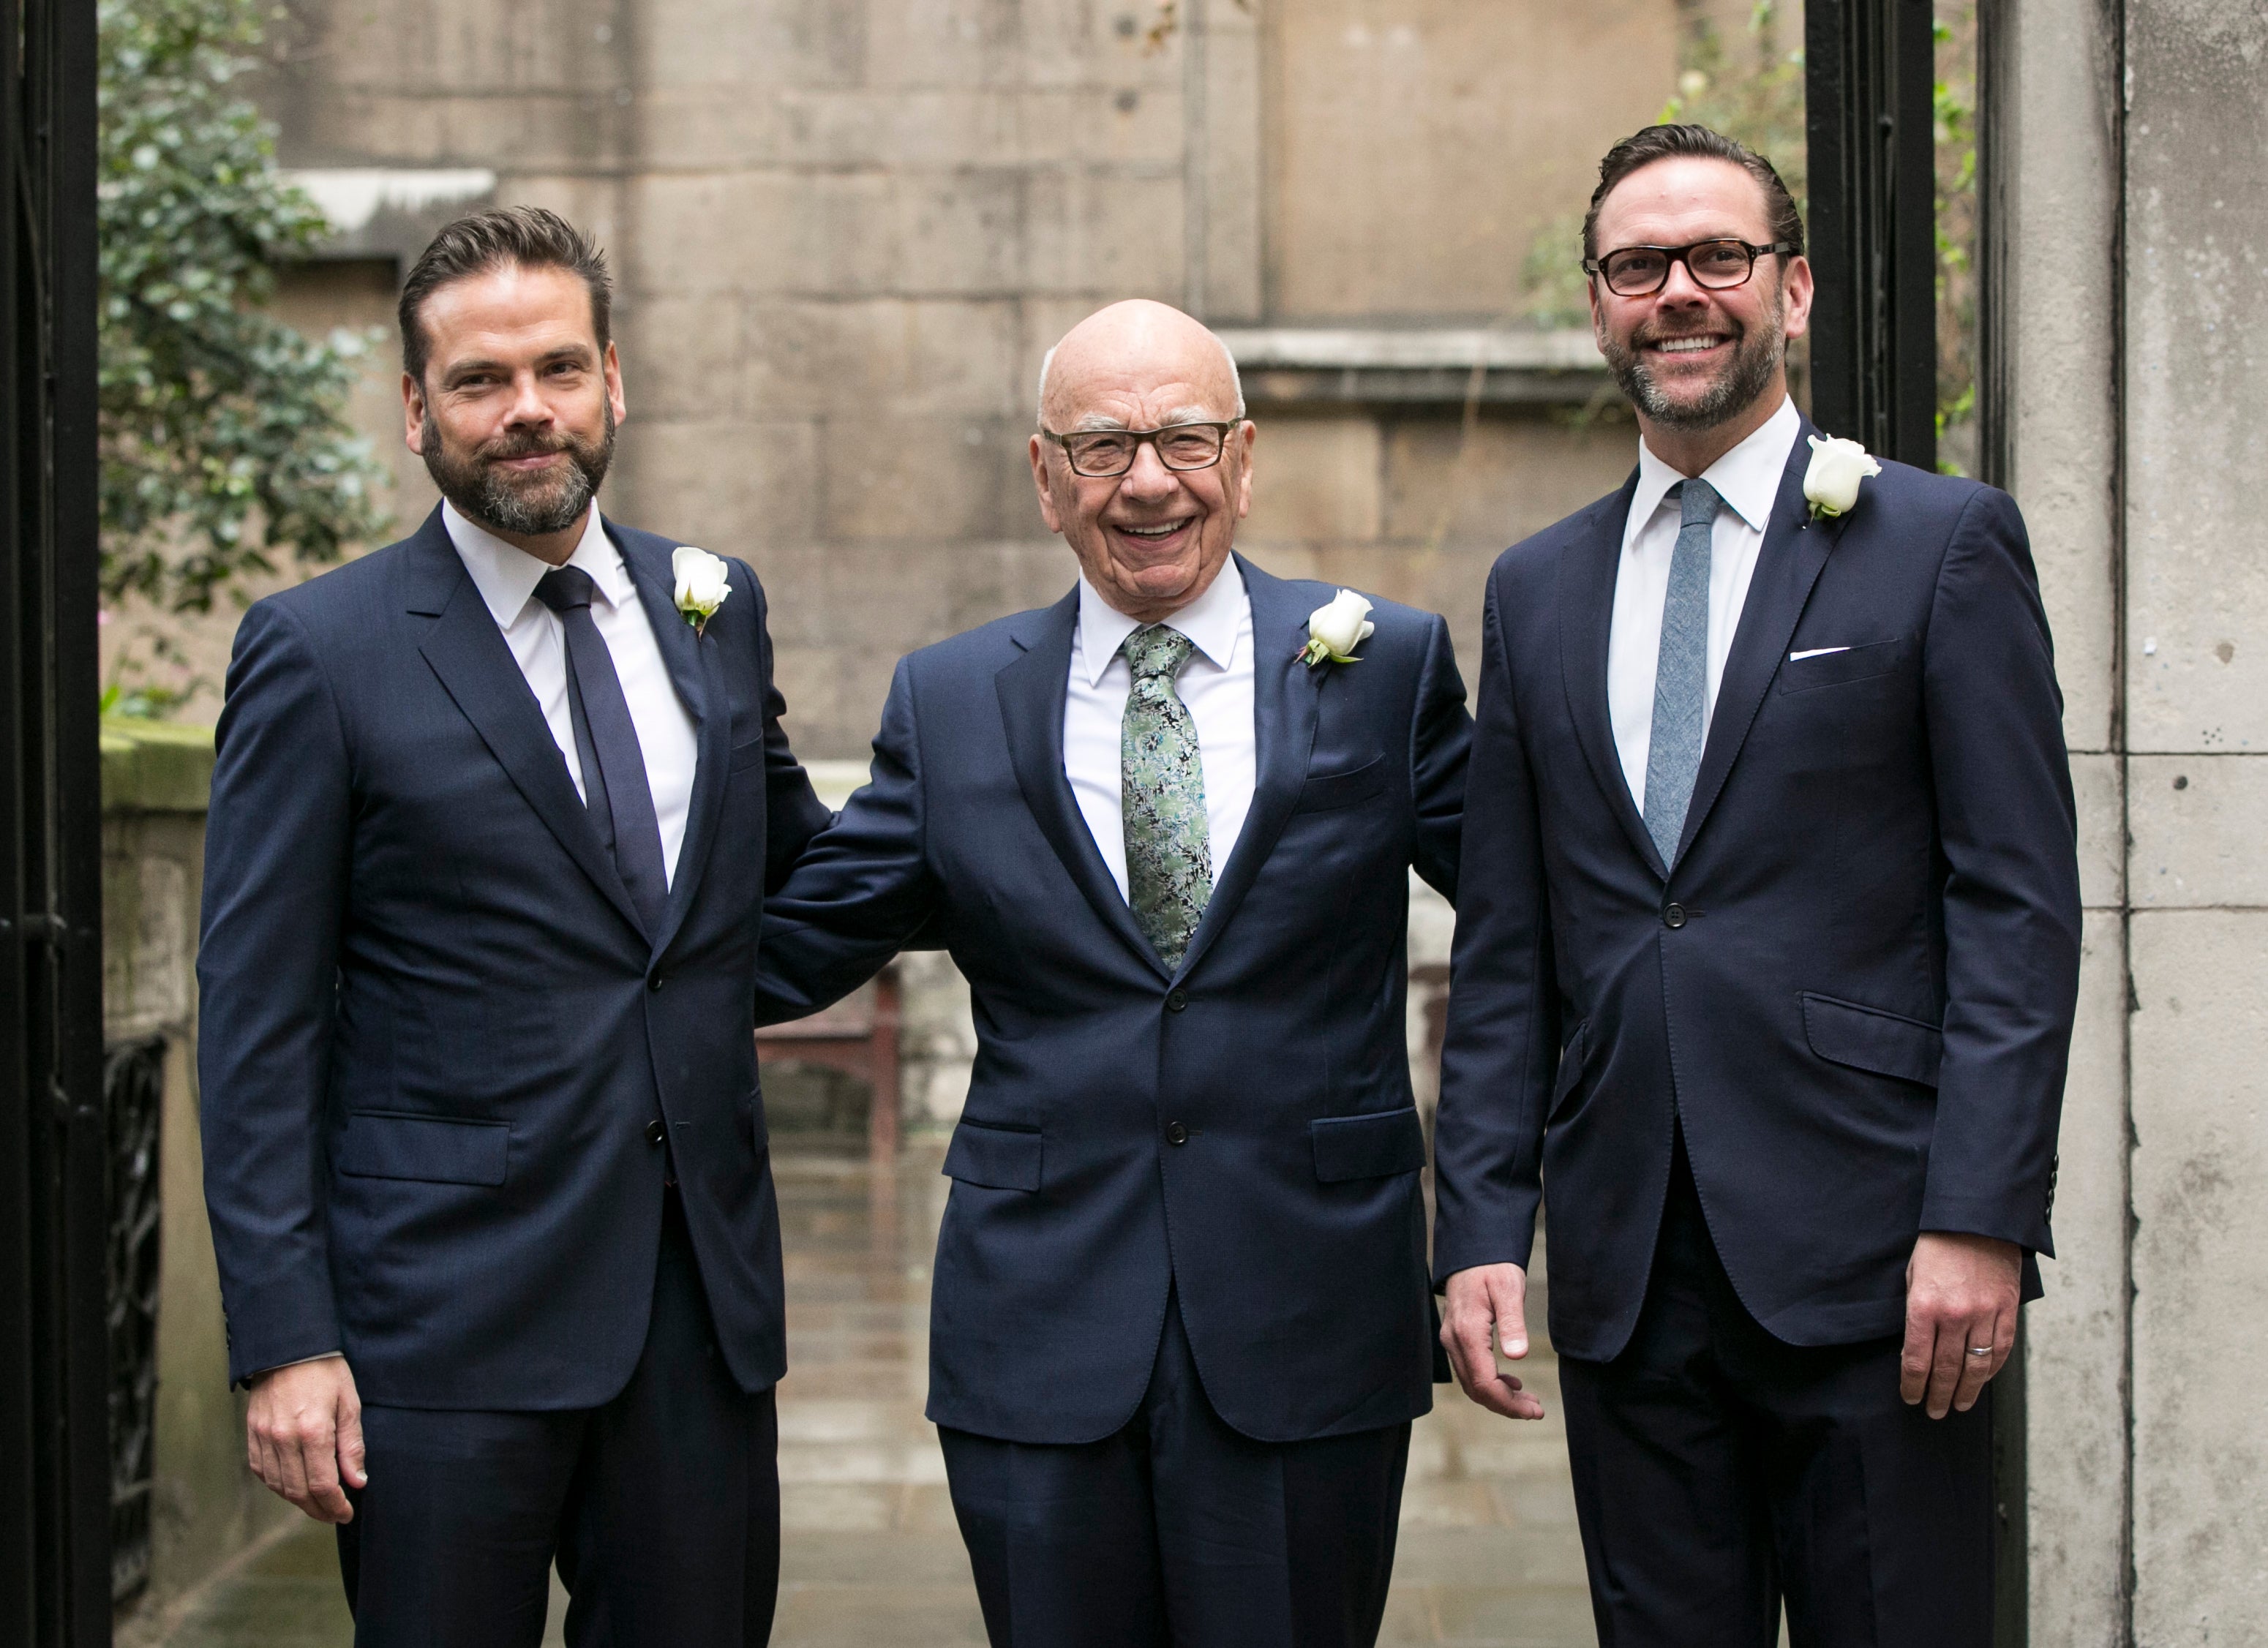 Rupert Murdoch arriving with his sons Lachlan and James at a celebratory event after his marriage to Jerry Hall in 2016